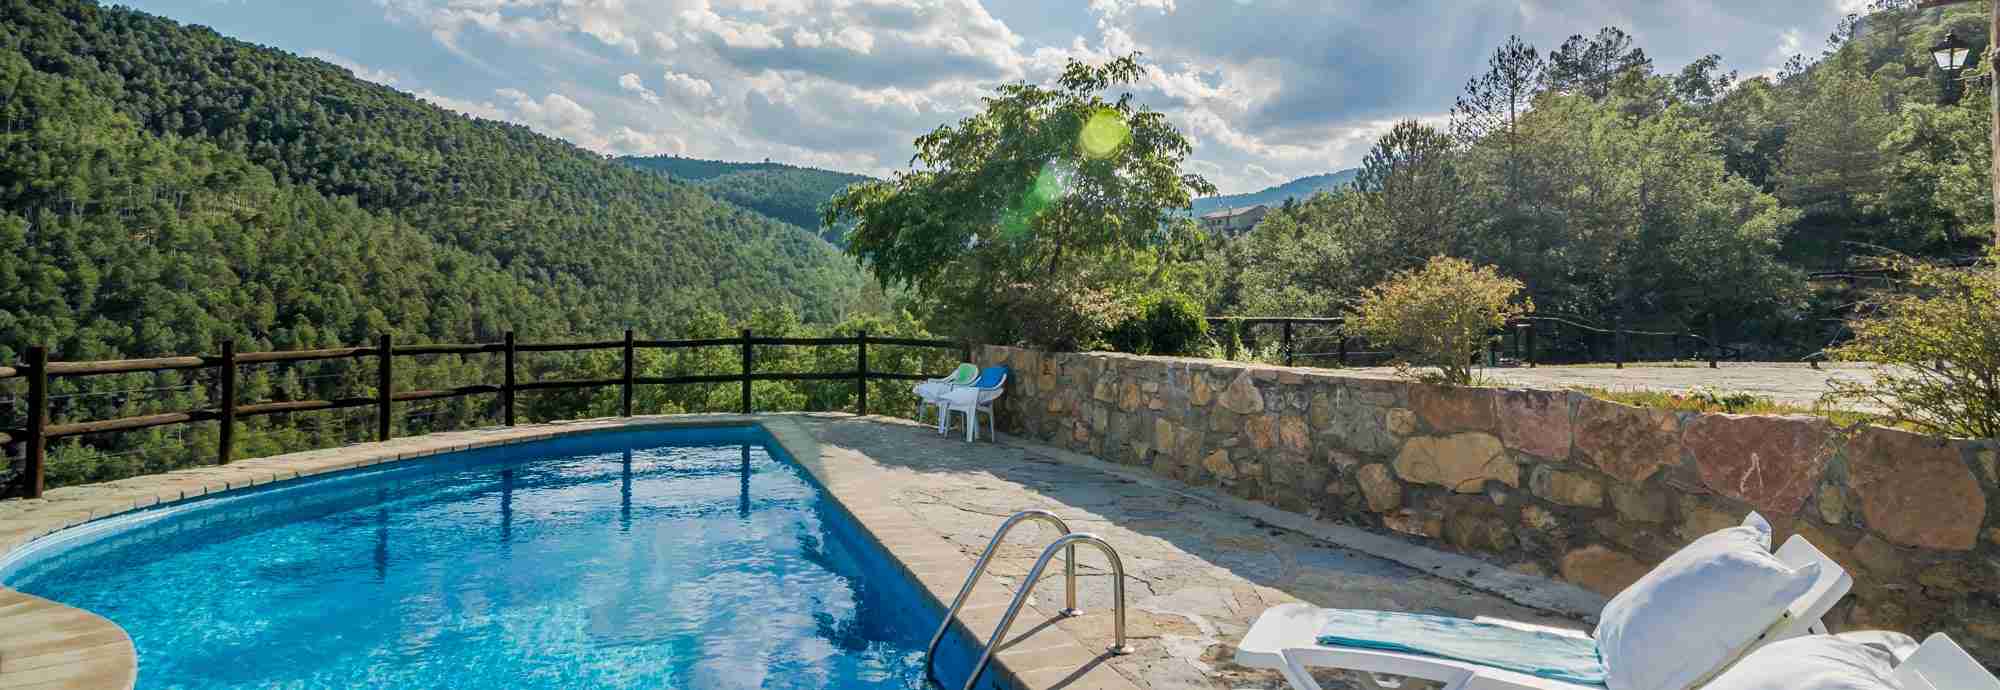 Private self-catering cottage with canyon views close to wild swimming holes